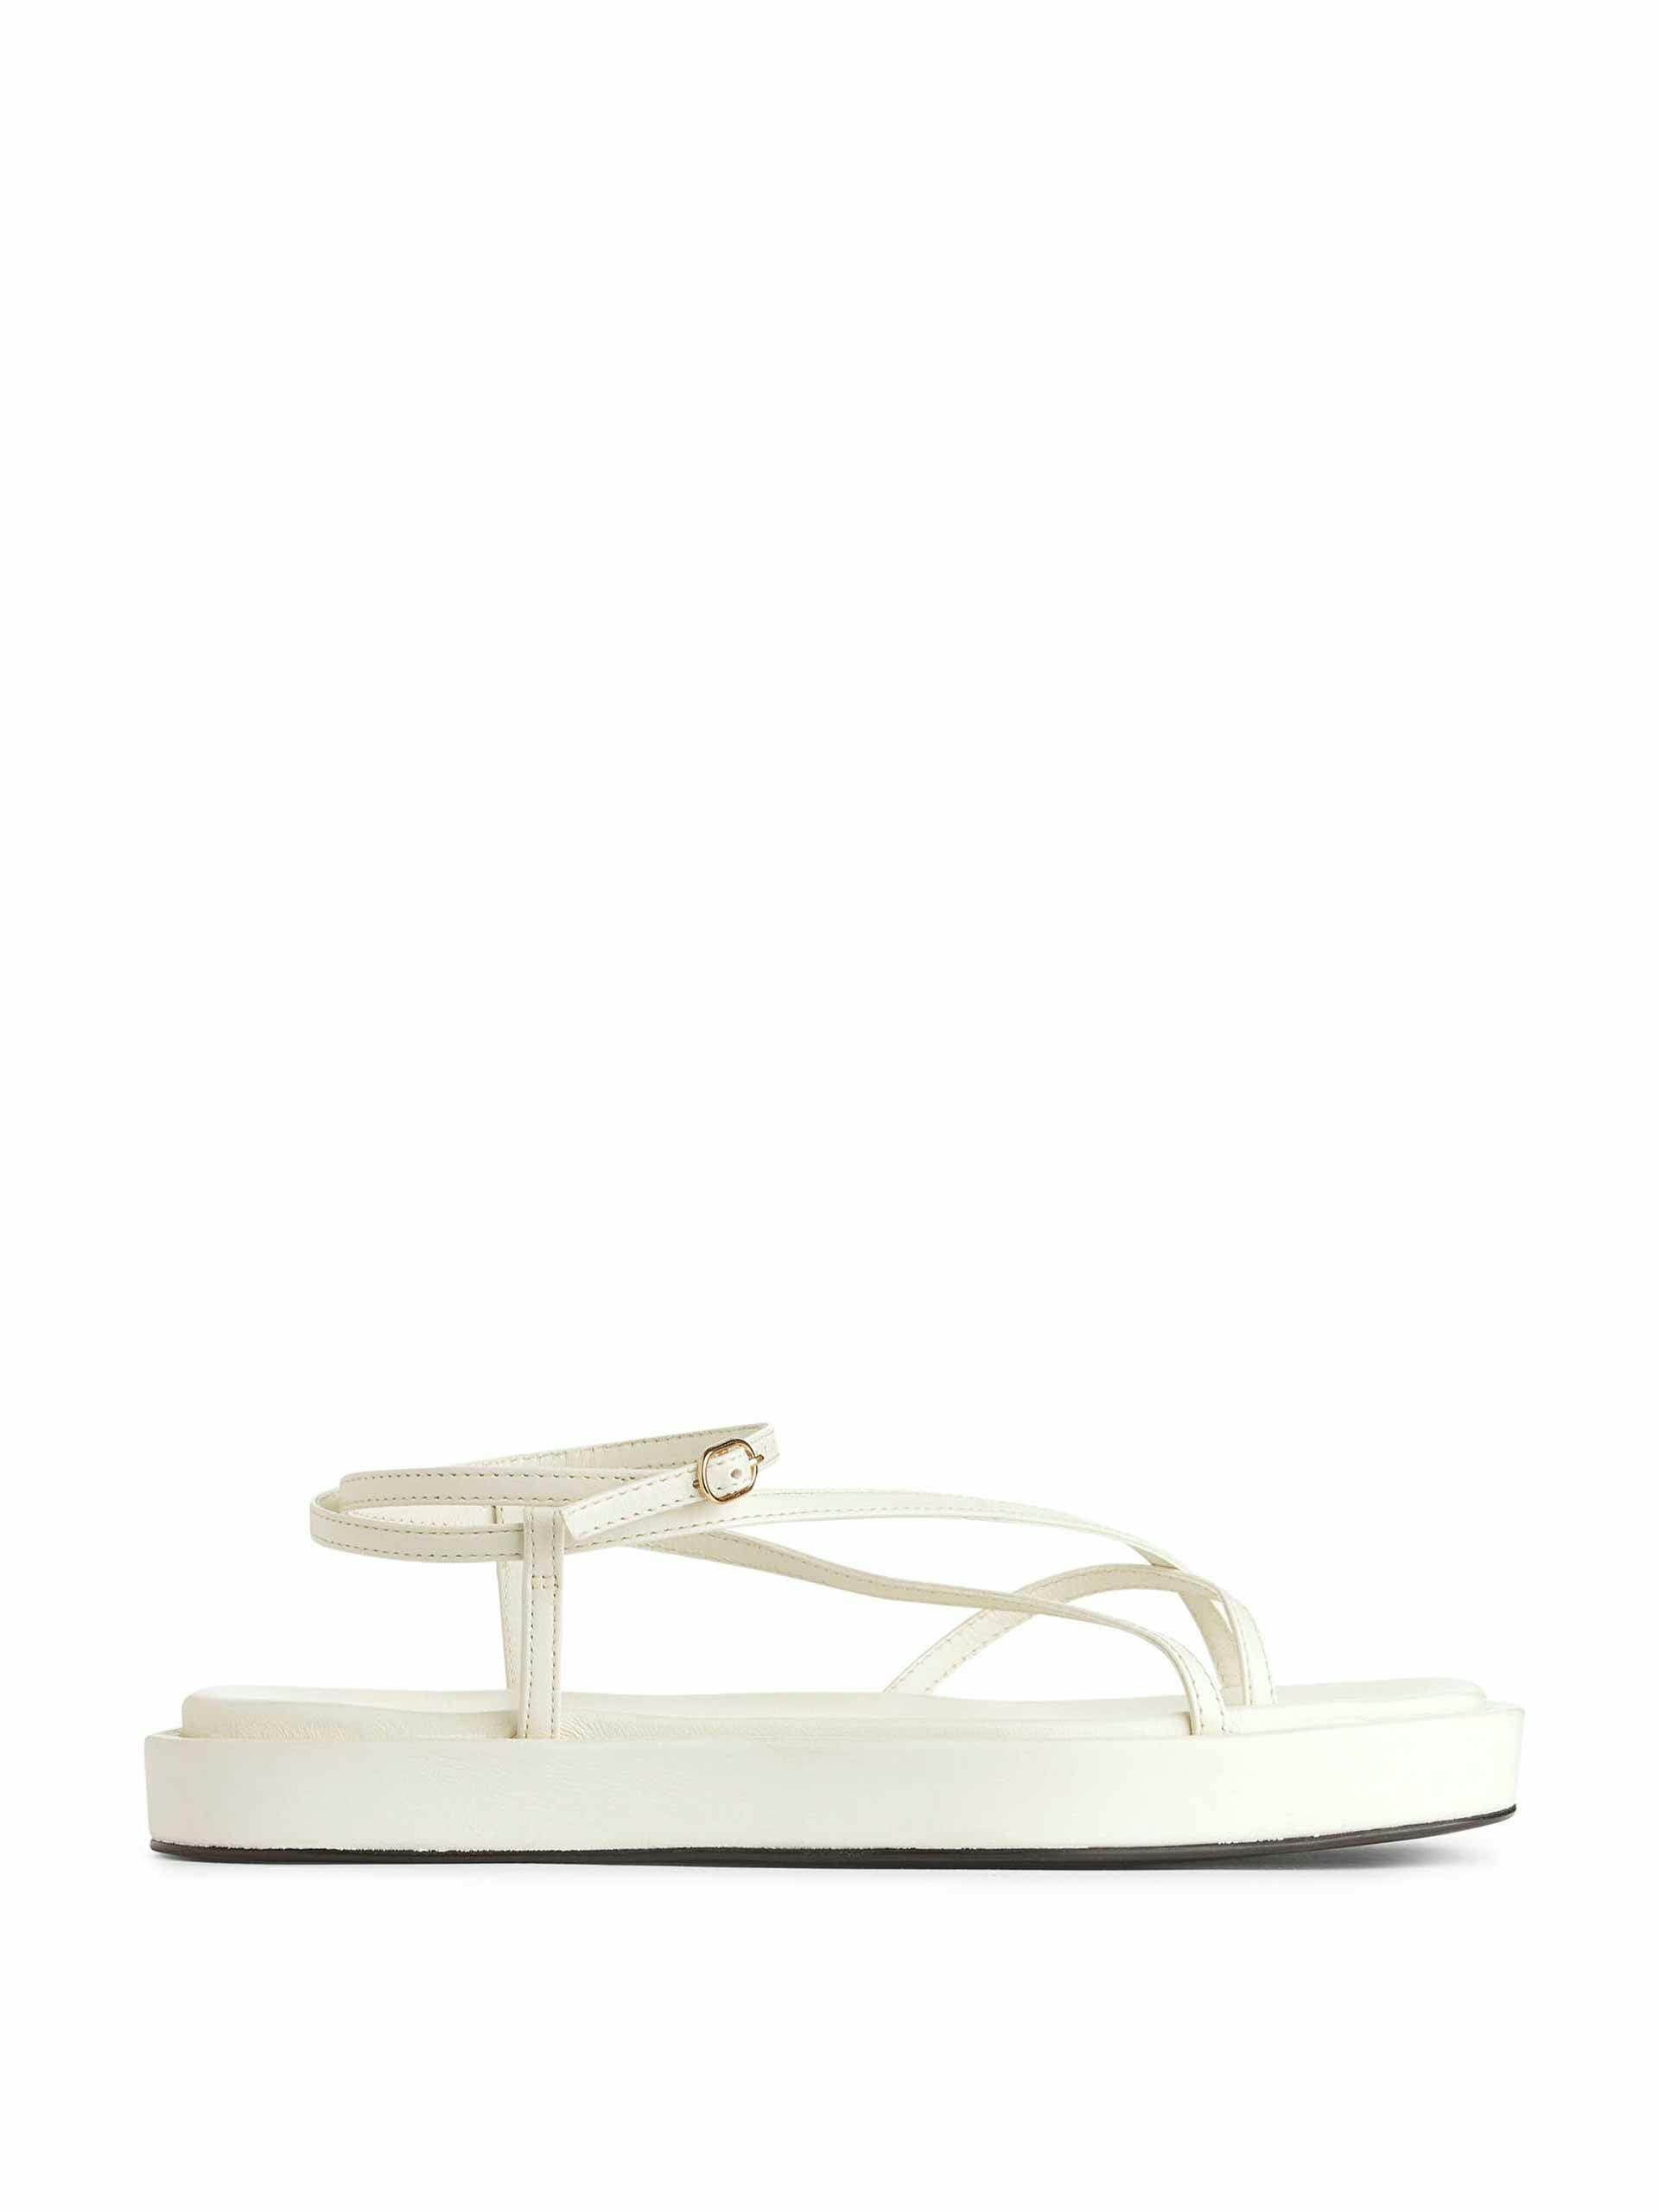 White leather strap sandals